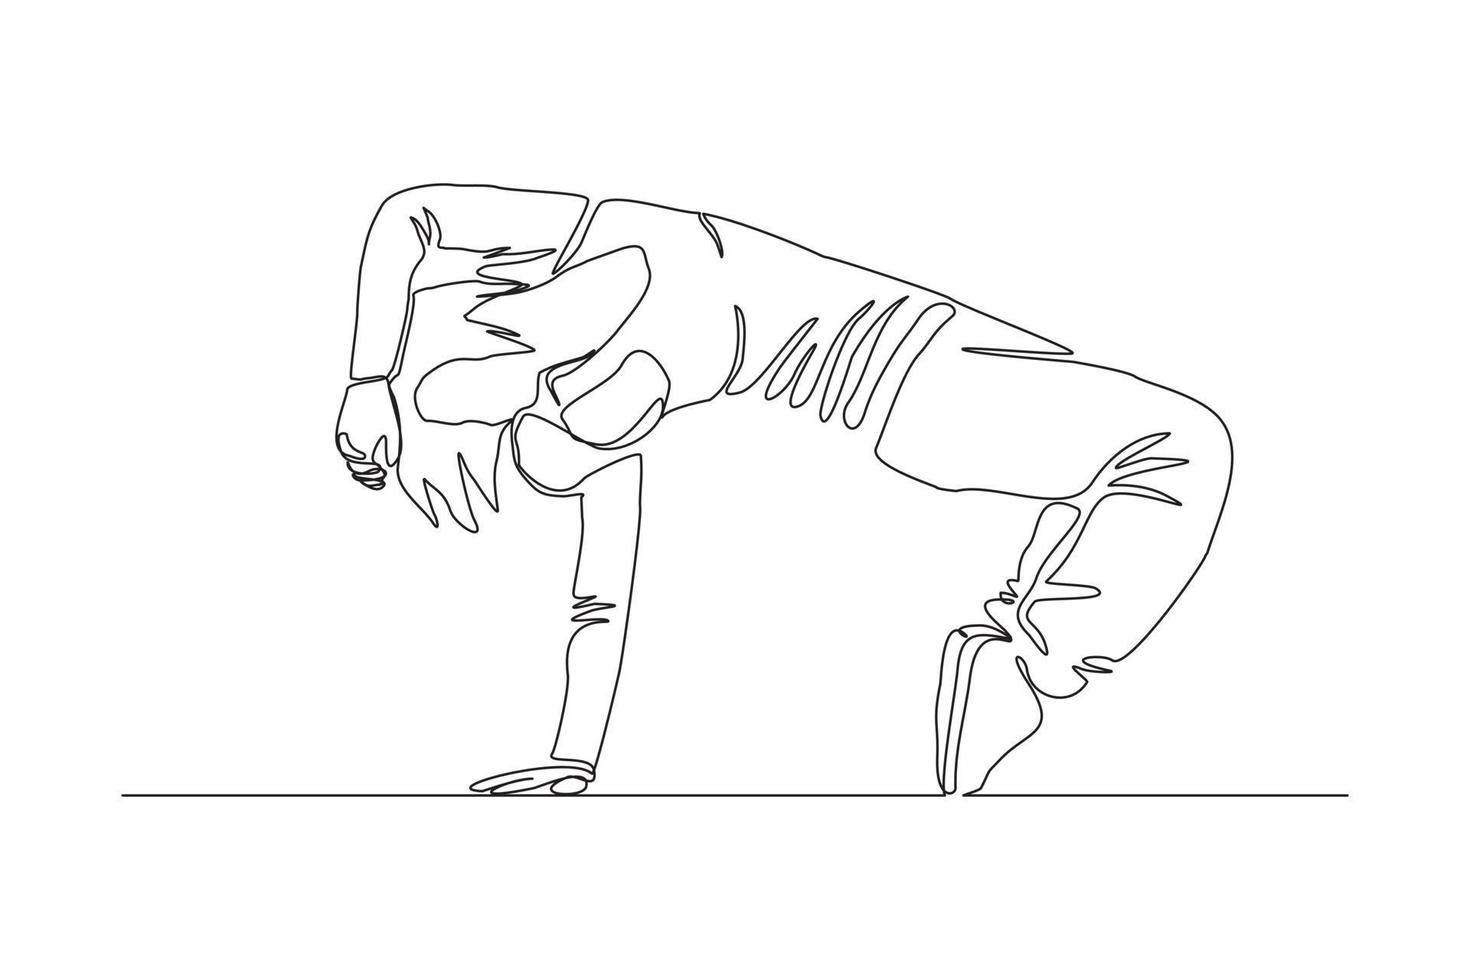 Continuous line drawing of woman break dancer hand stand. Single one line art concept of female hip hop dance. Vector illustration